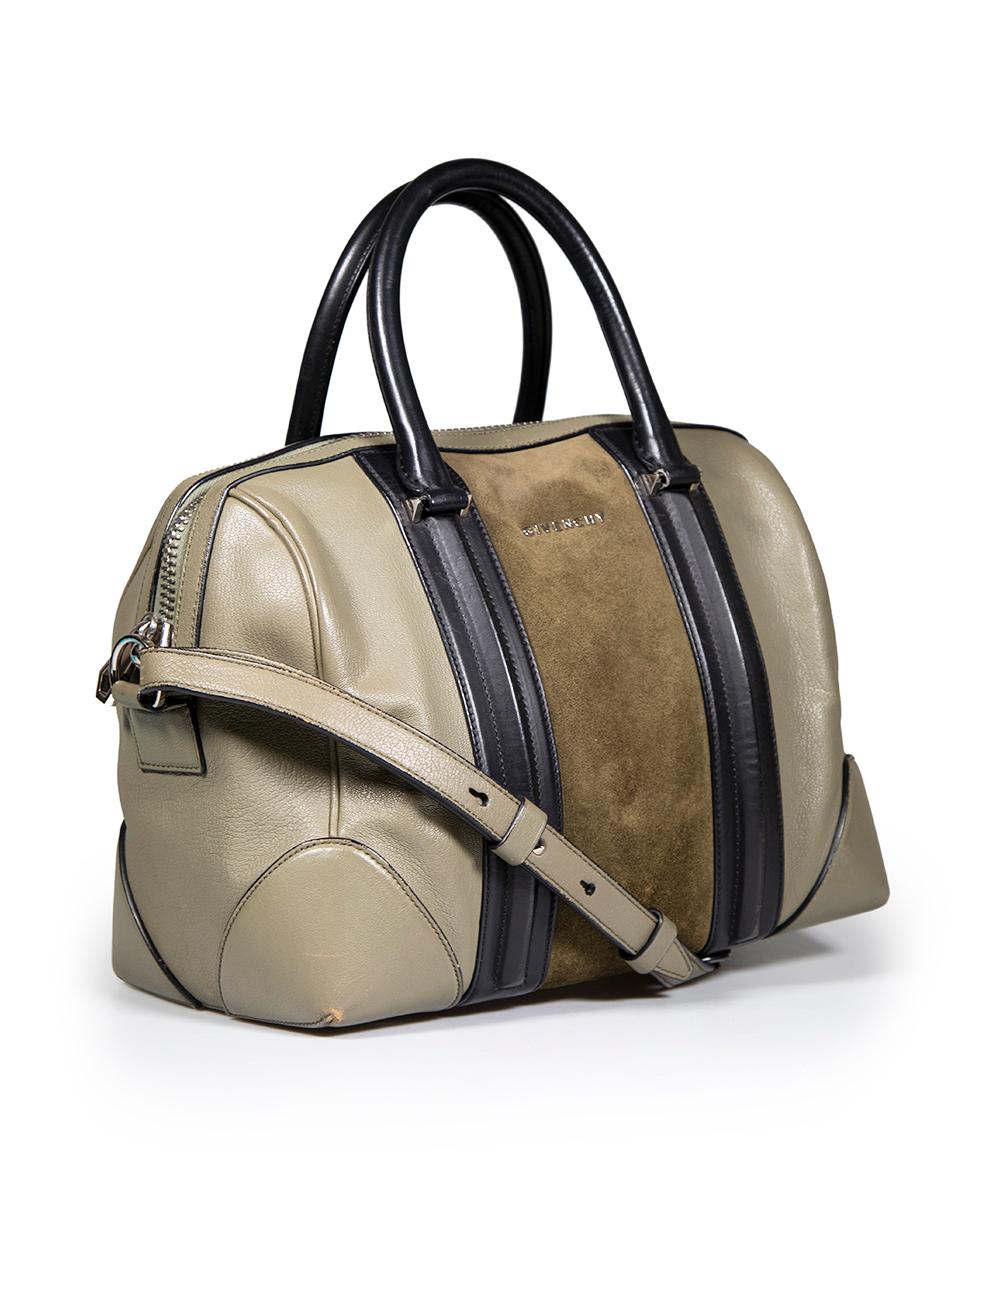 CONDITION is Good. General wear to bag is evident. Moderate signs of wear and abrasions to base corners, leather trims, handles, strap, and suede back on this used Givenchy designer resale item.
 
 
 
 Details
 
 
 Model: Lucrezia
 
 Khaki
 
